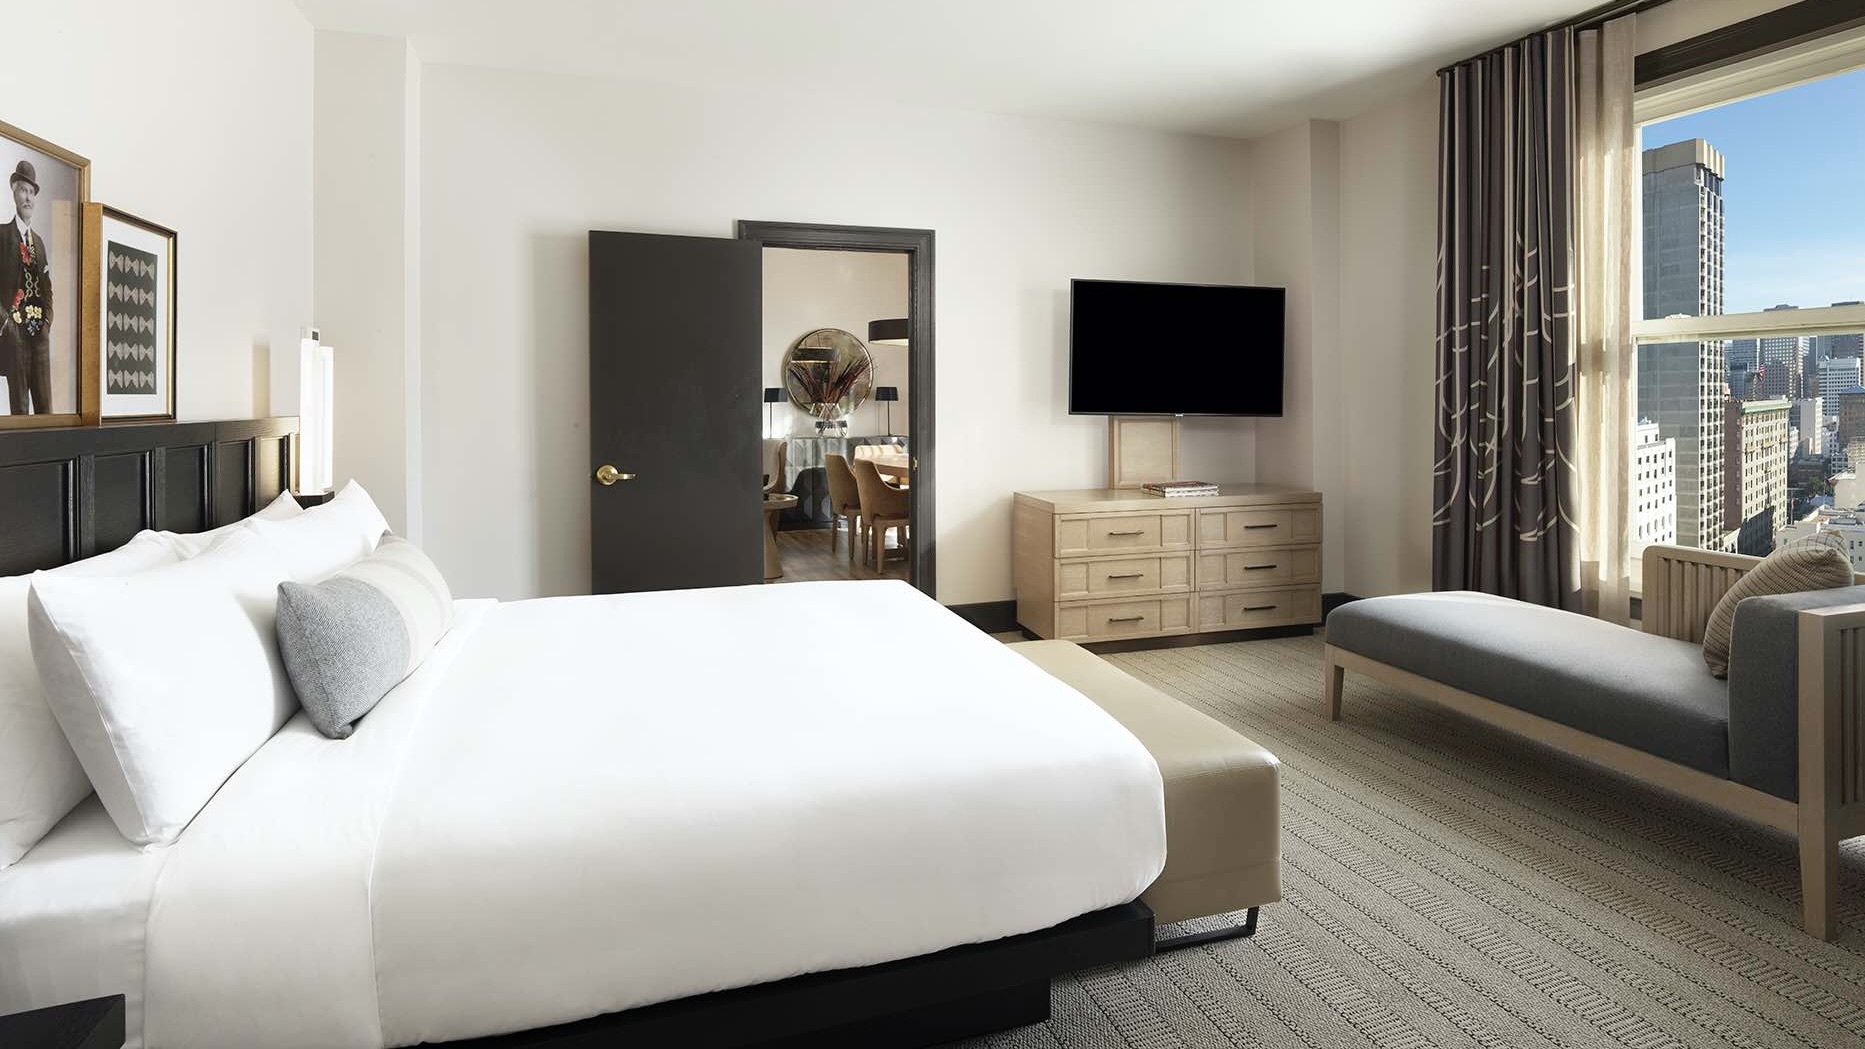 Deluxe Suite Bedroom with adjoining room and city view at The Clift Royal Sonesta Hotel